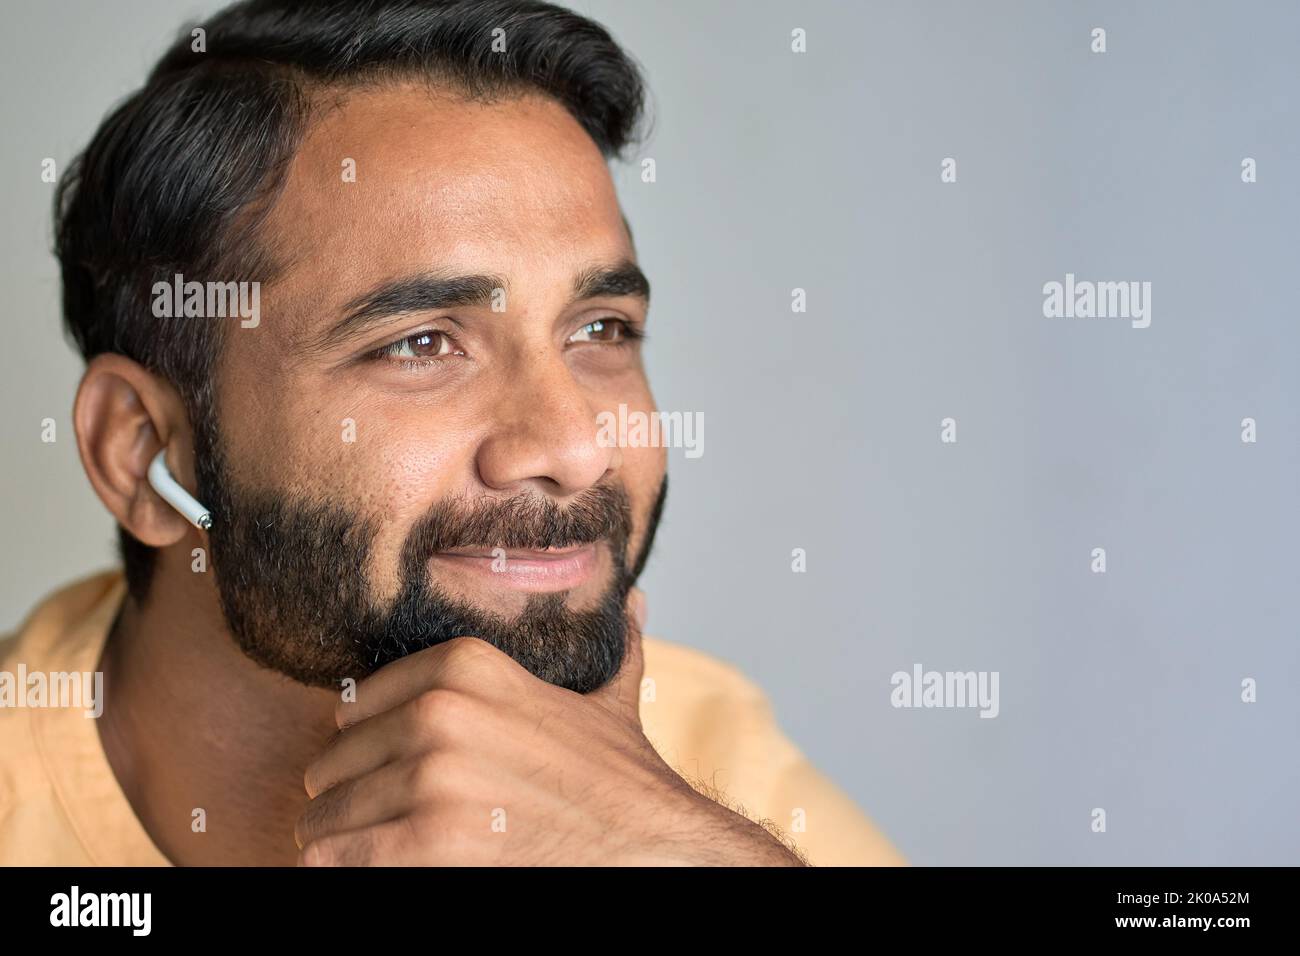 Smiling indian man wearing earbuds listening music or podcast. Closeup Stock Photo